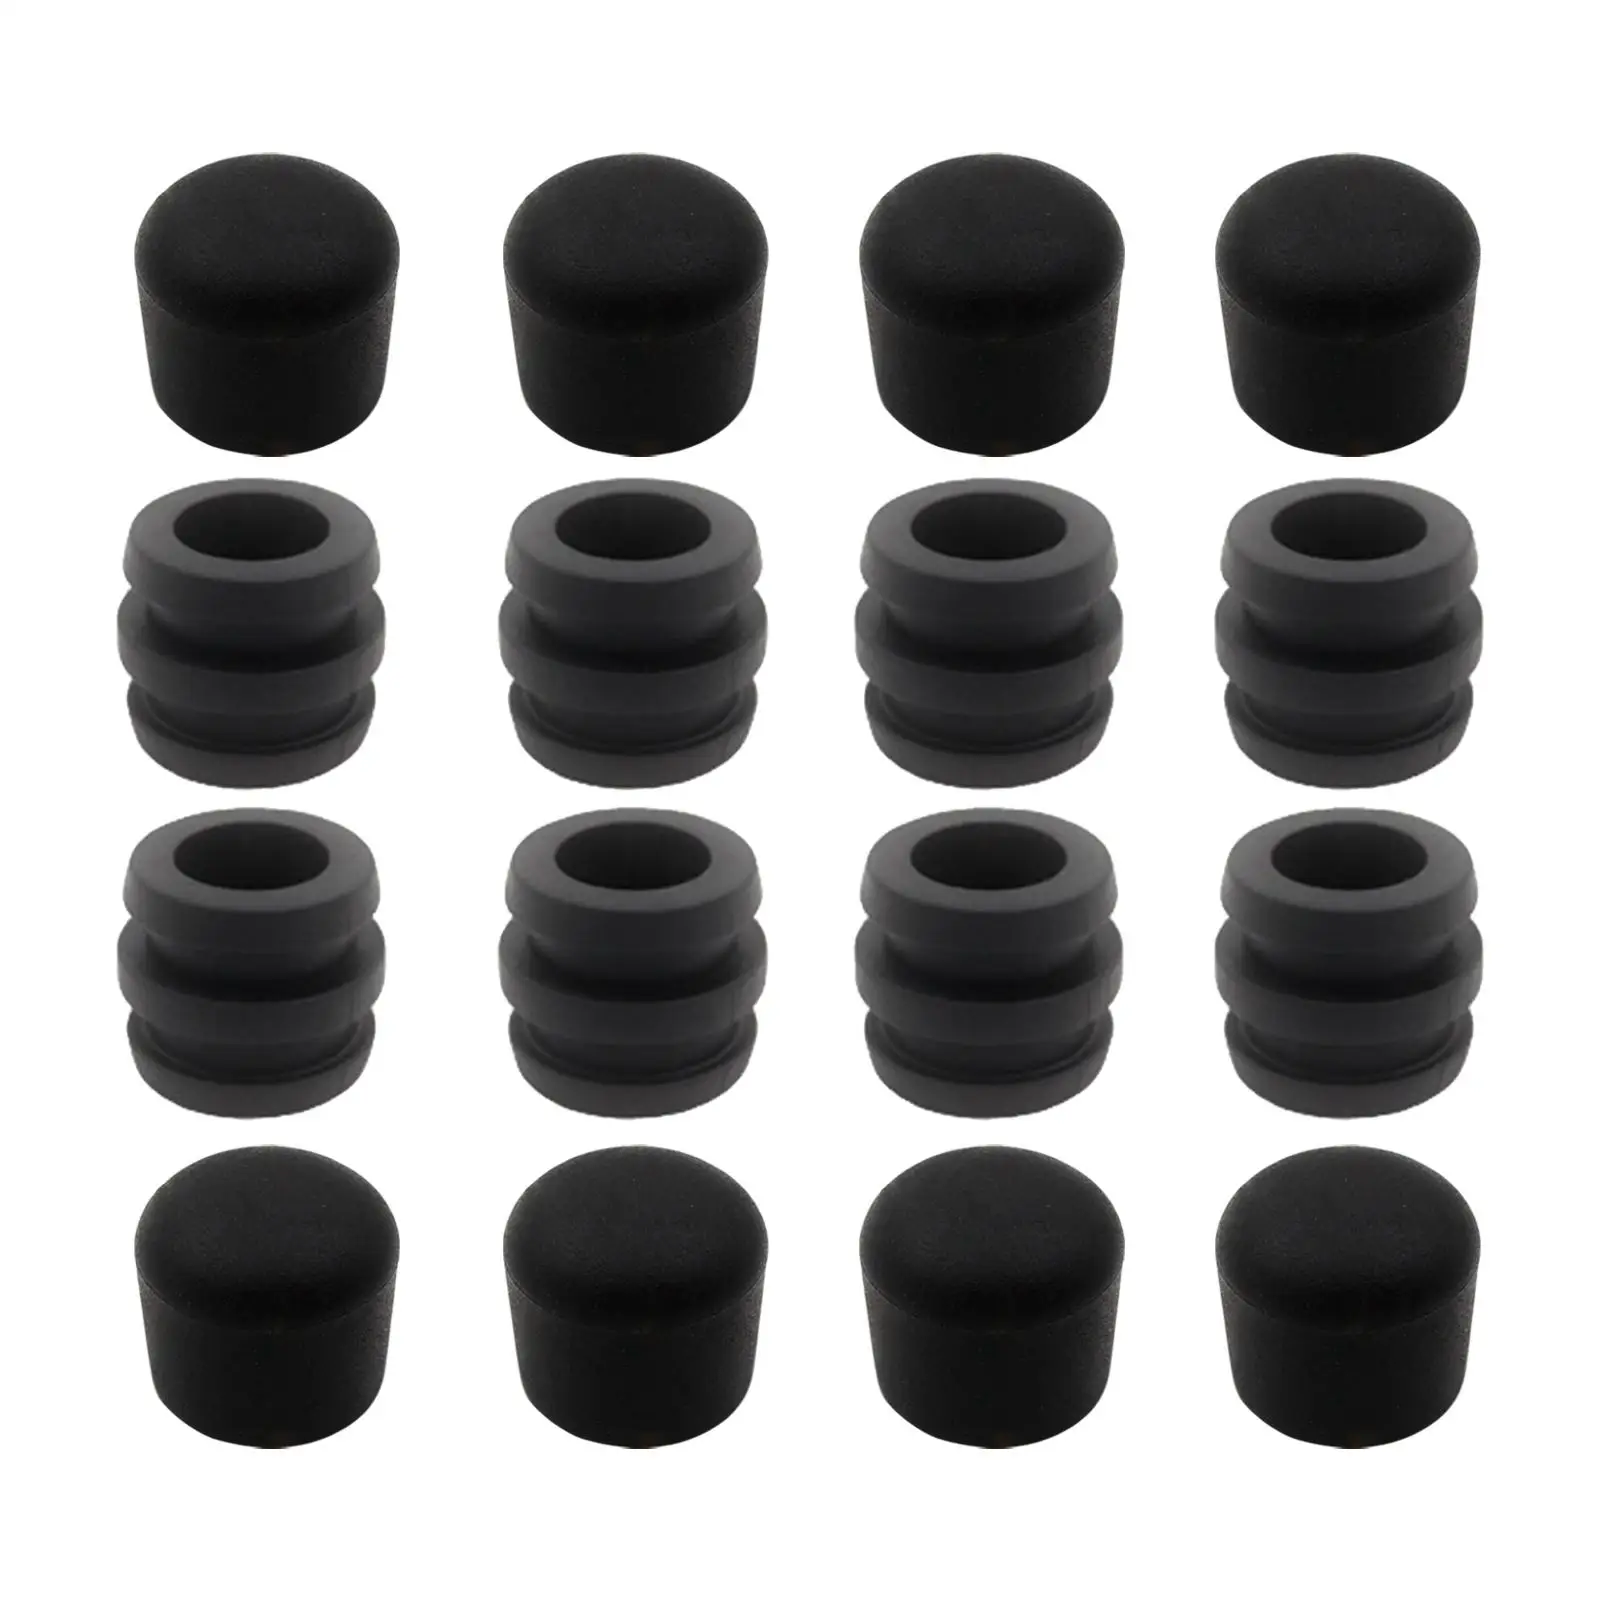 Rod Bumpers EndFoosball Ball Replacement Durable Rubber Bumper